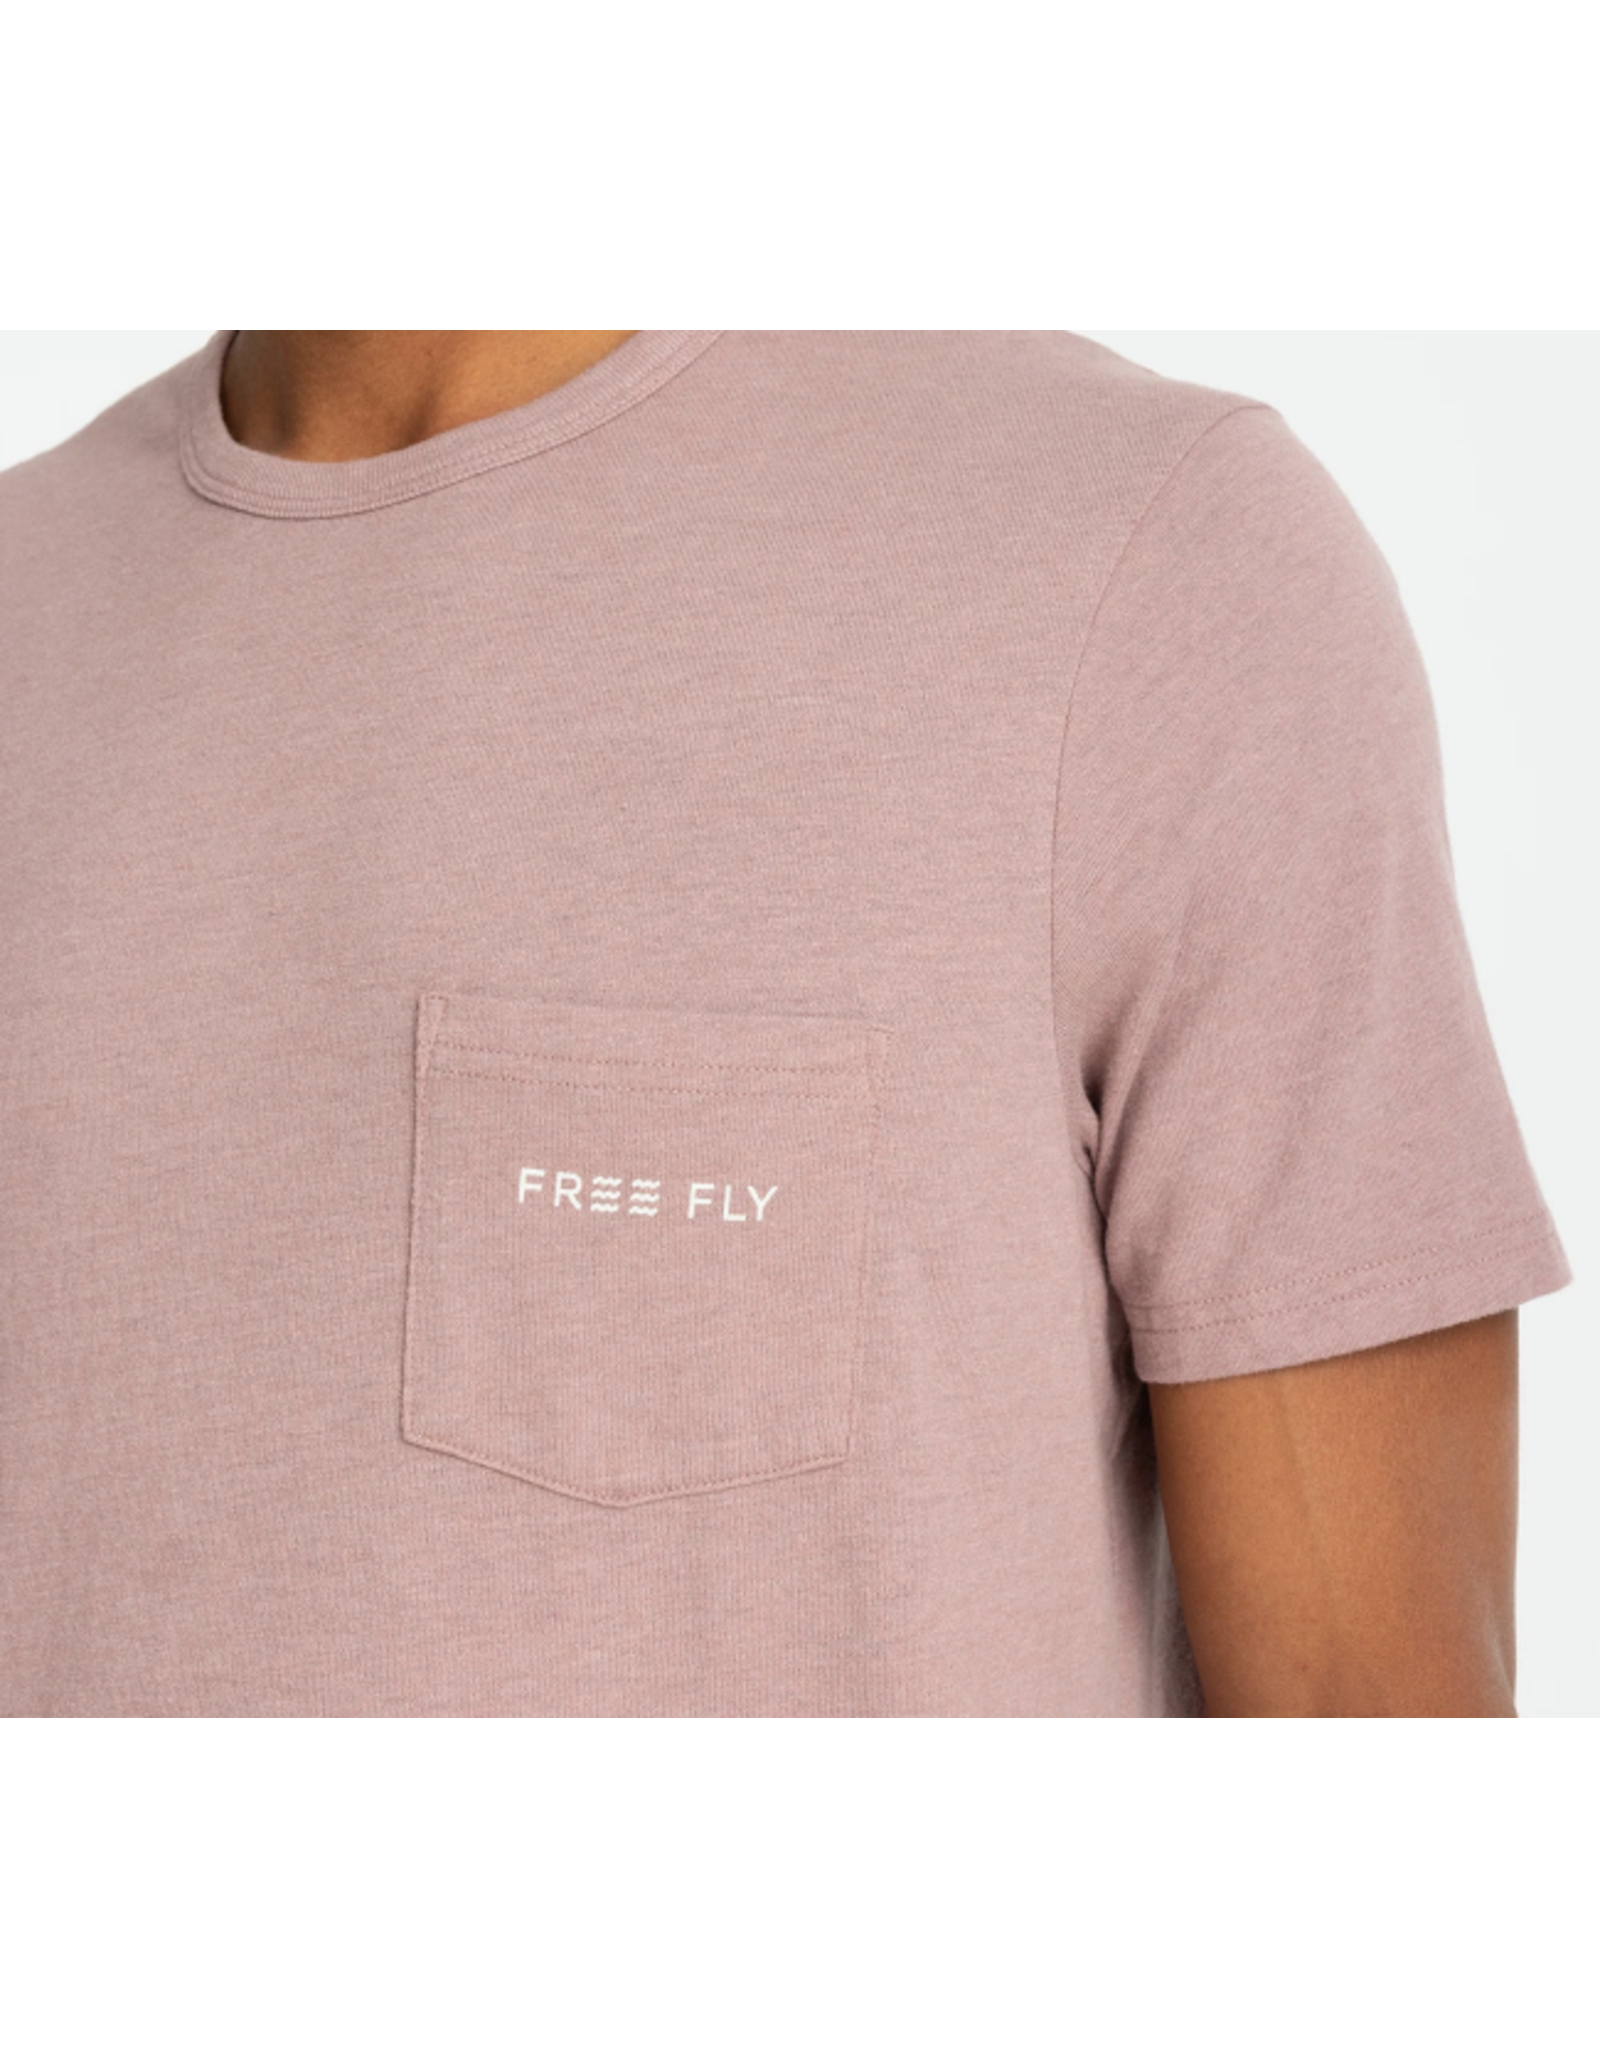 FREEFLY Channel Markers Pocket Tee